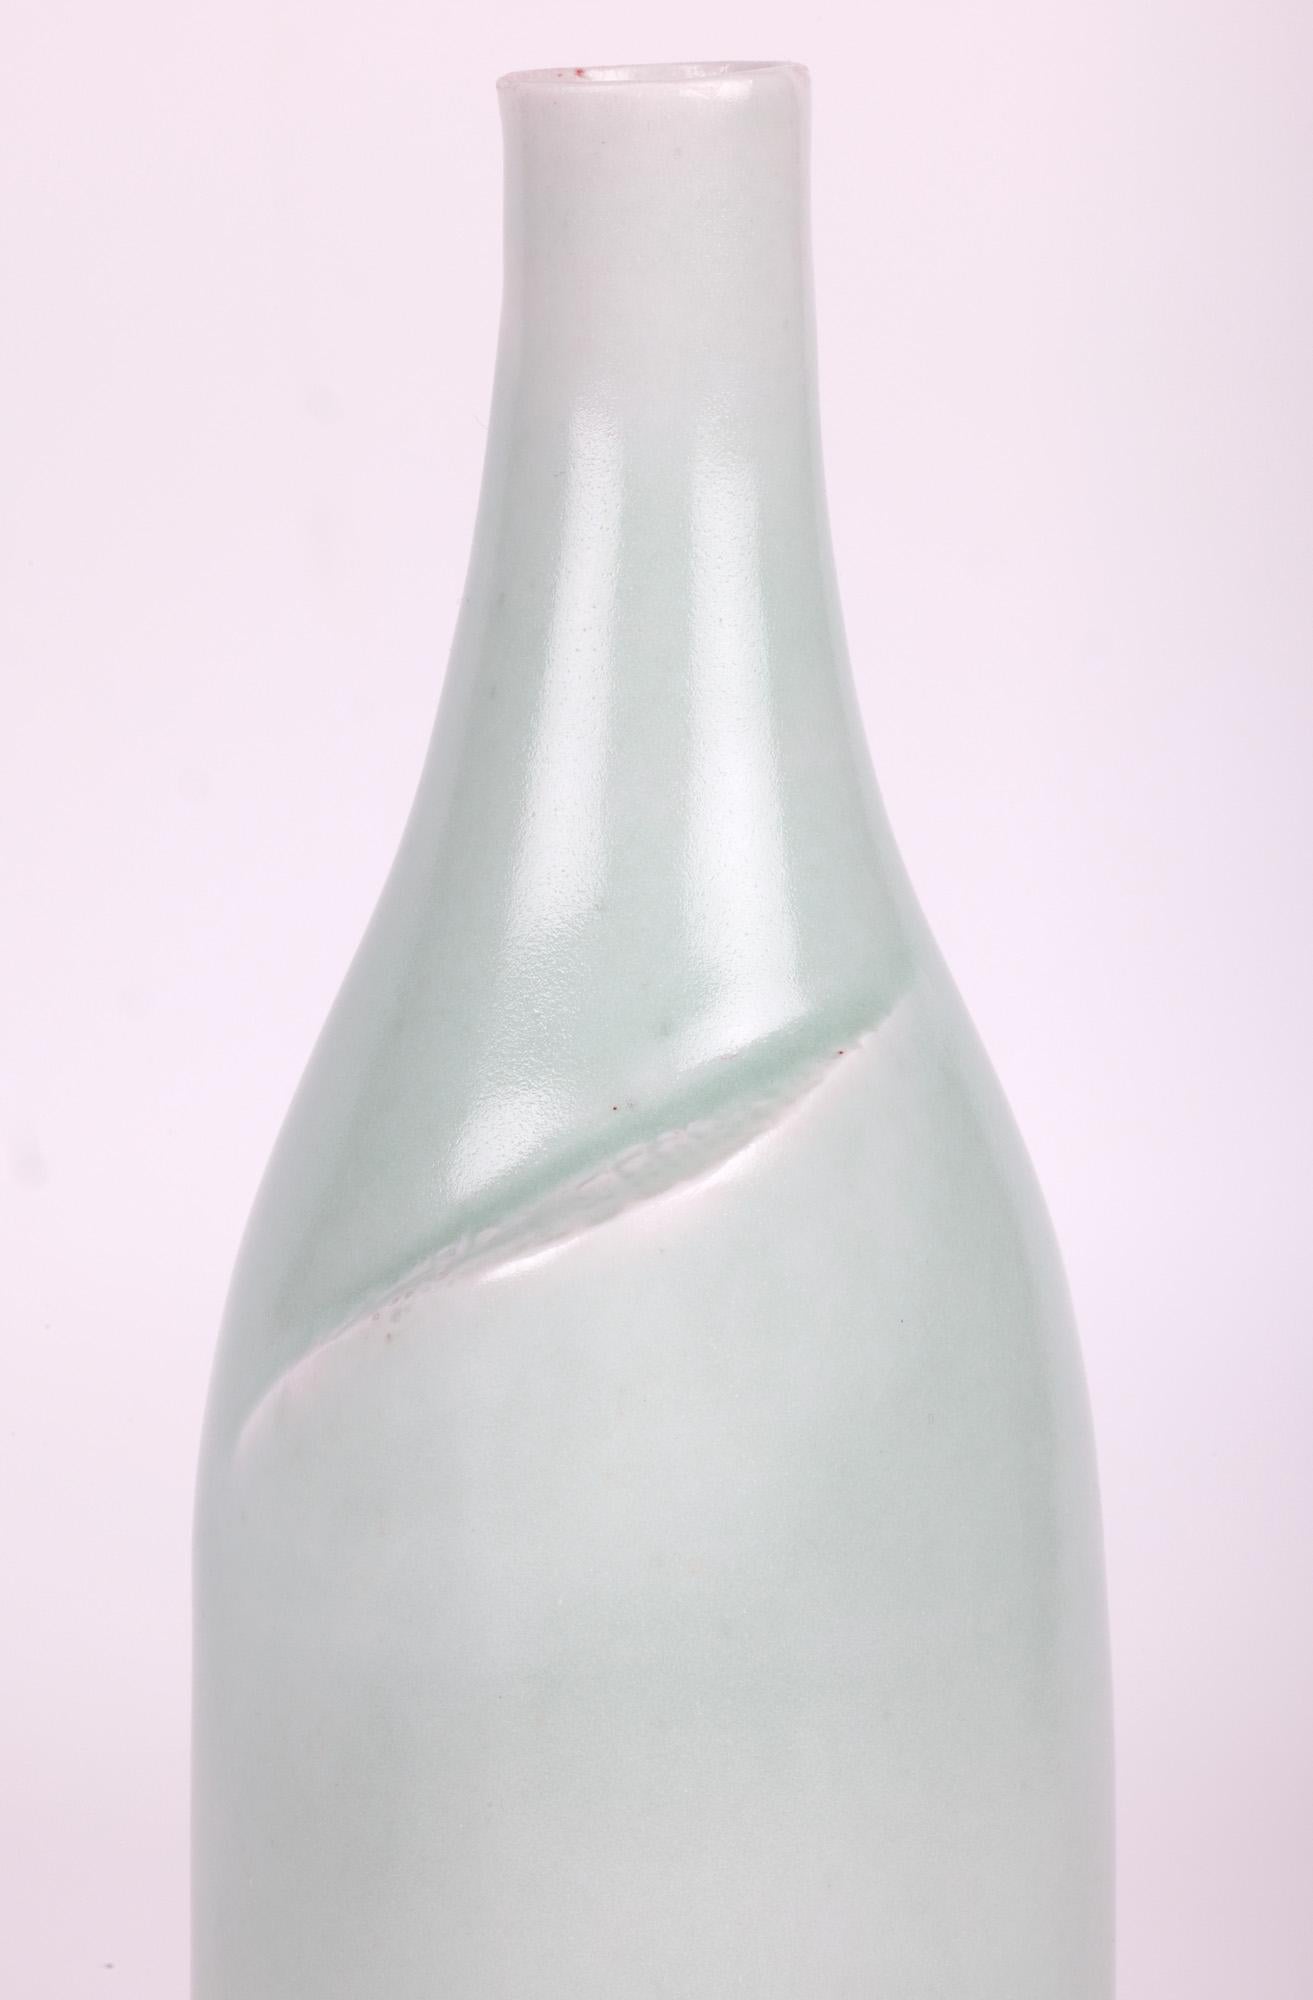 A stunning studio ceramic porcelain bottle shaped vase decorated in celadon green glazes by renowned Cambridgeshire based potter Sonia Lewis acquired from a large collection and believed to date from the latter 20th century. This finely potted vase